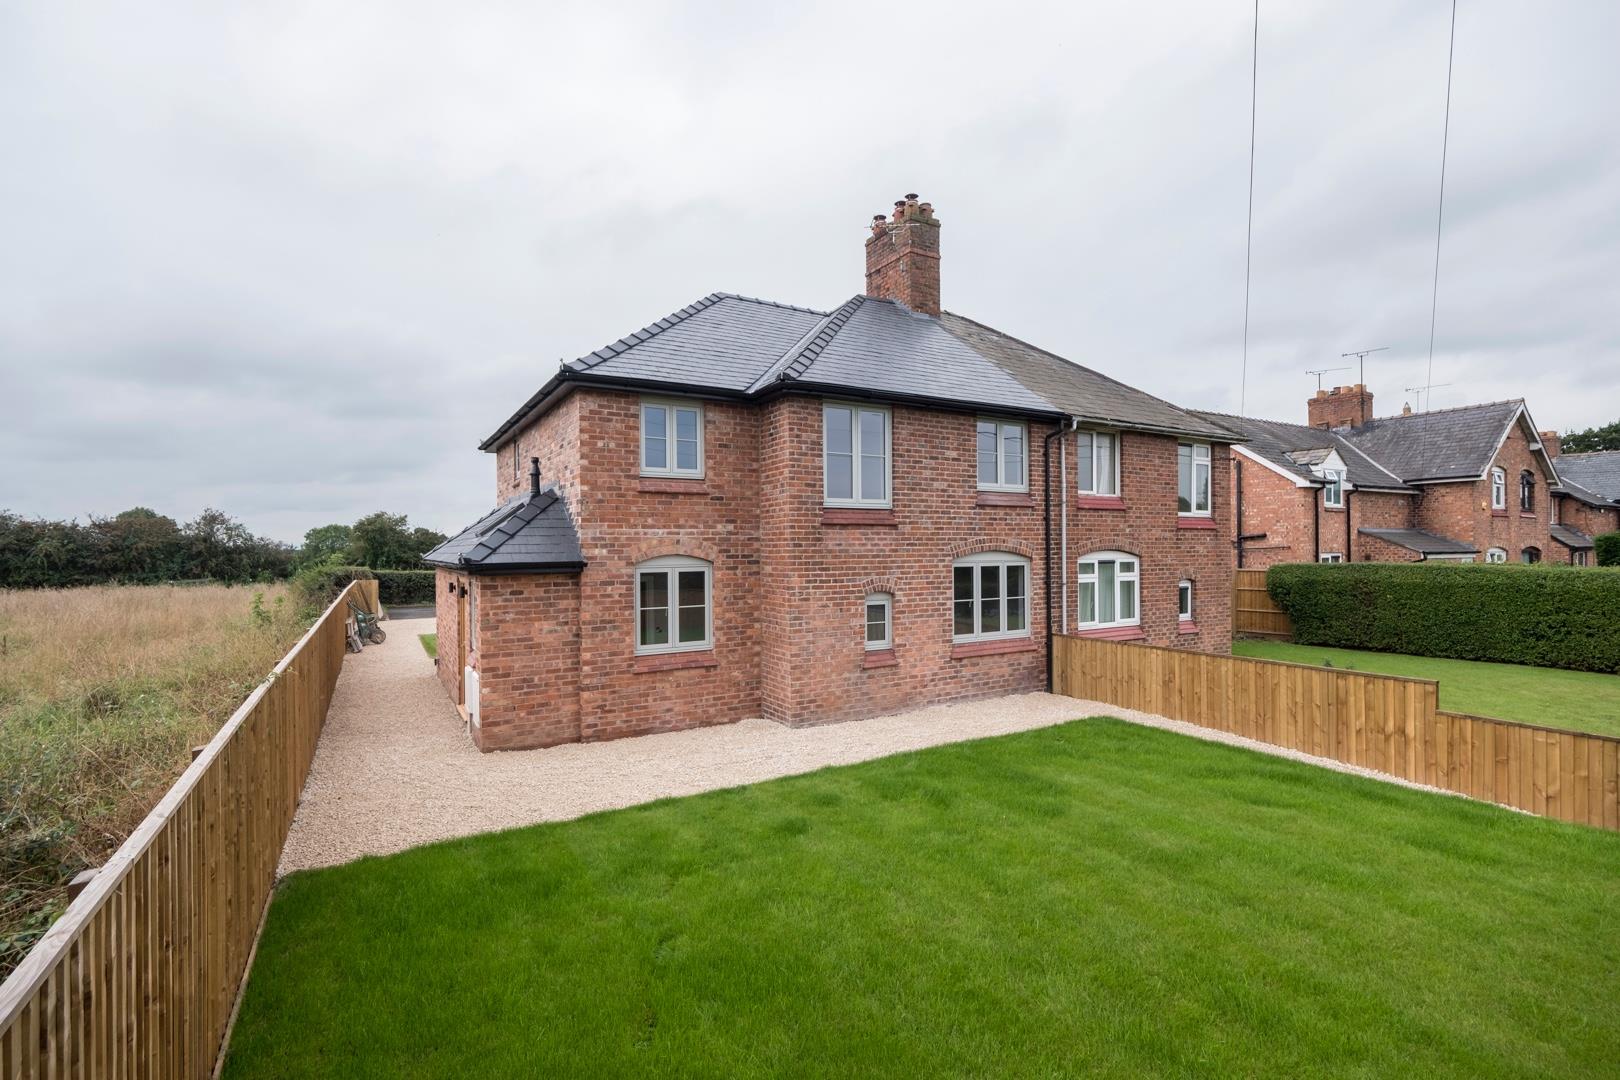 3 bedroom  Semi Detached House for Sale in Clotton